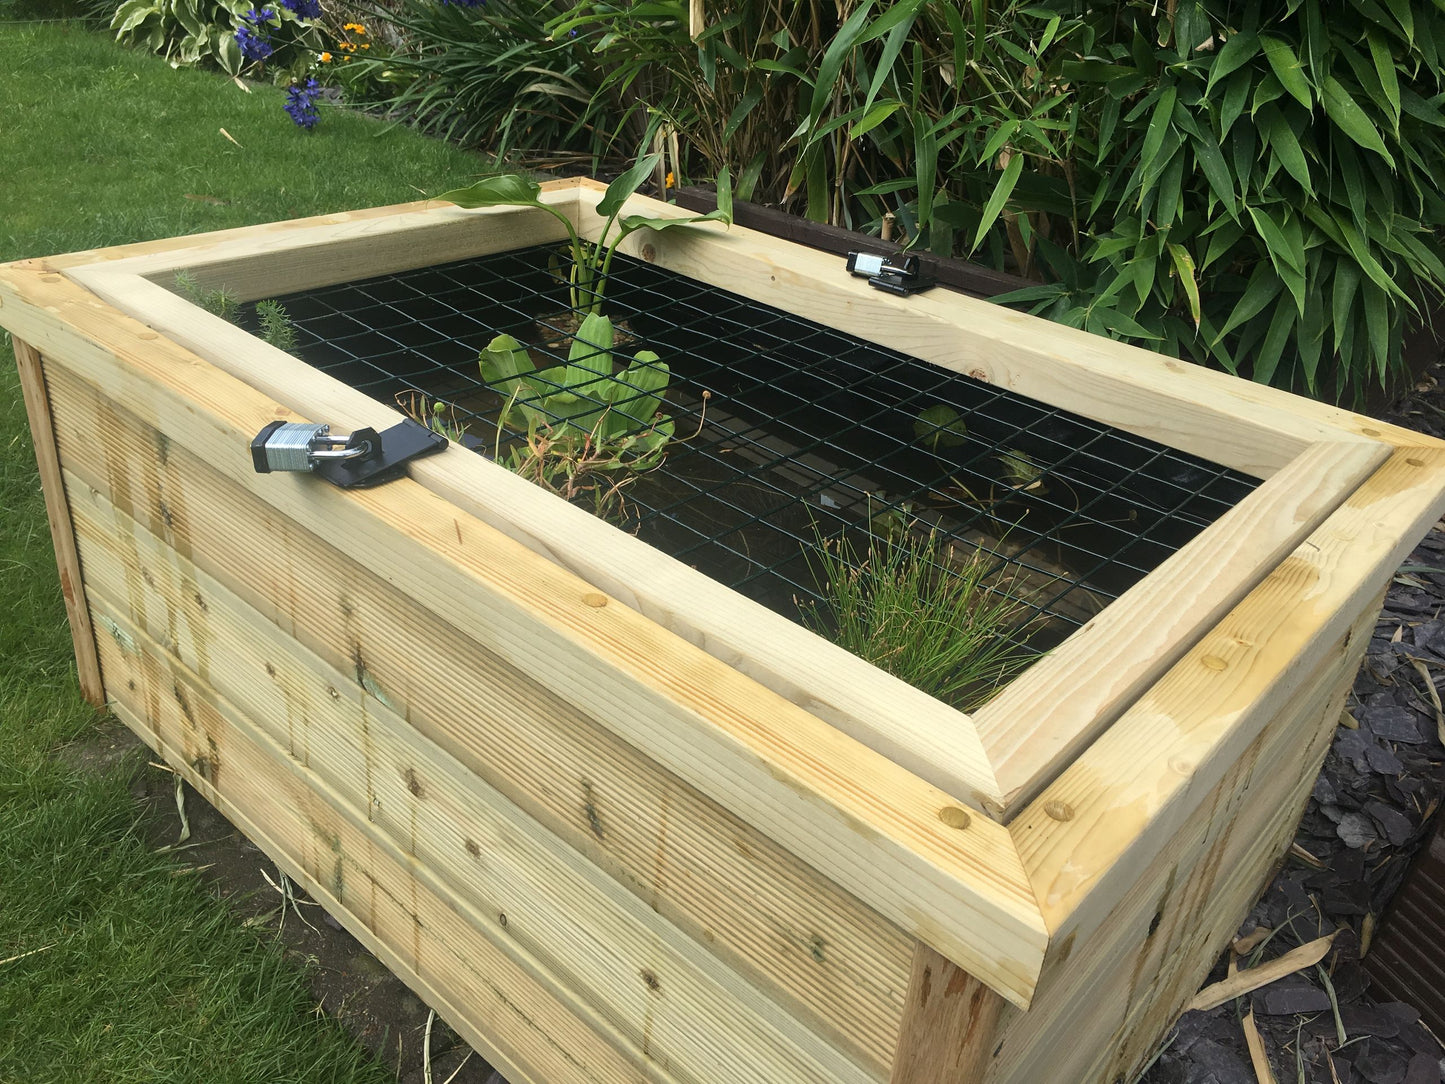 Wooden Pond With Lockable Lid